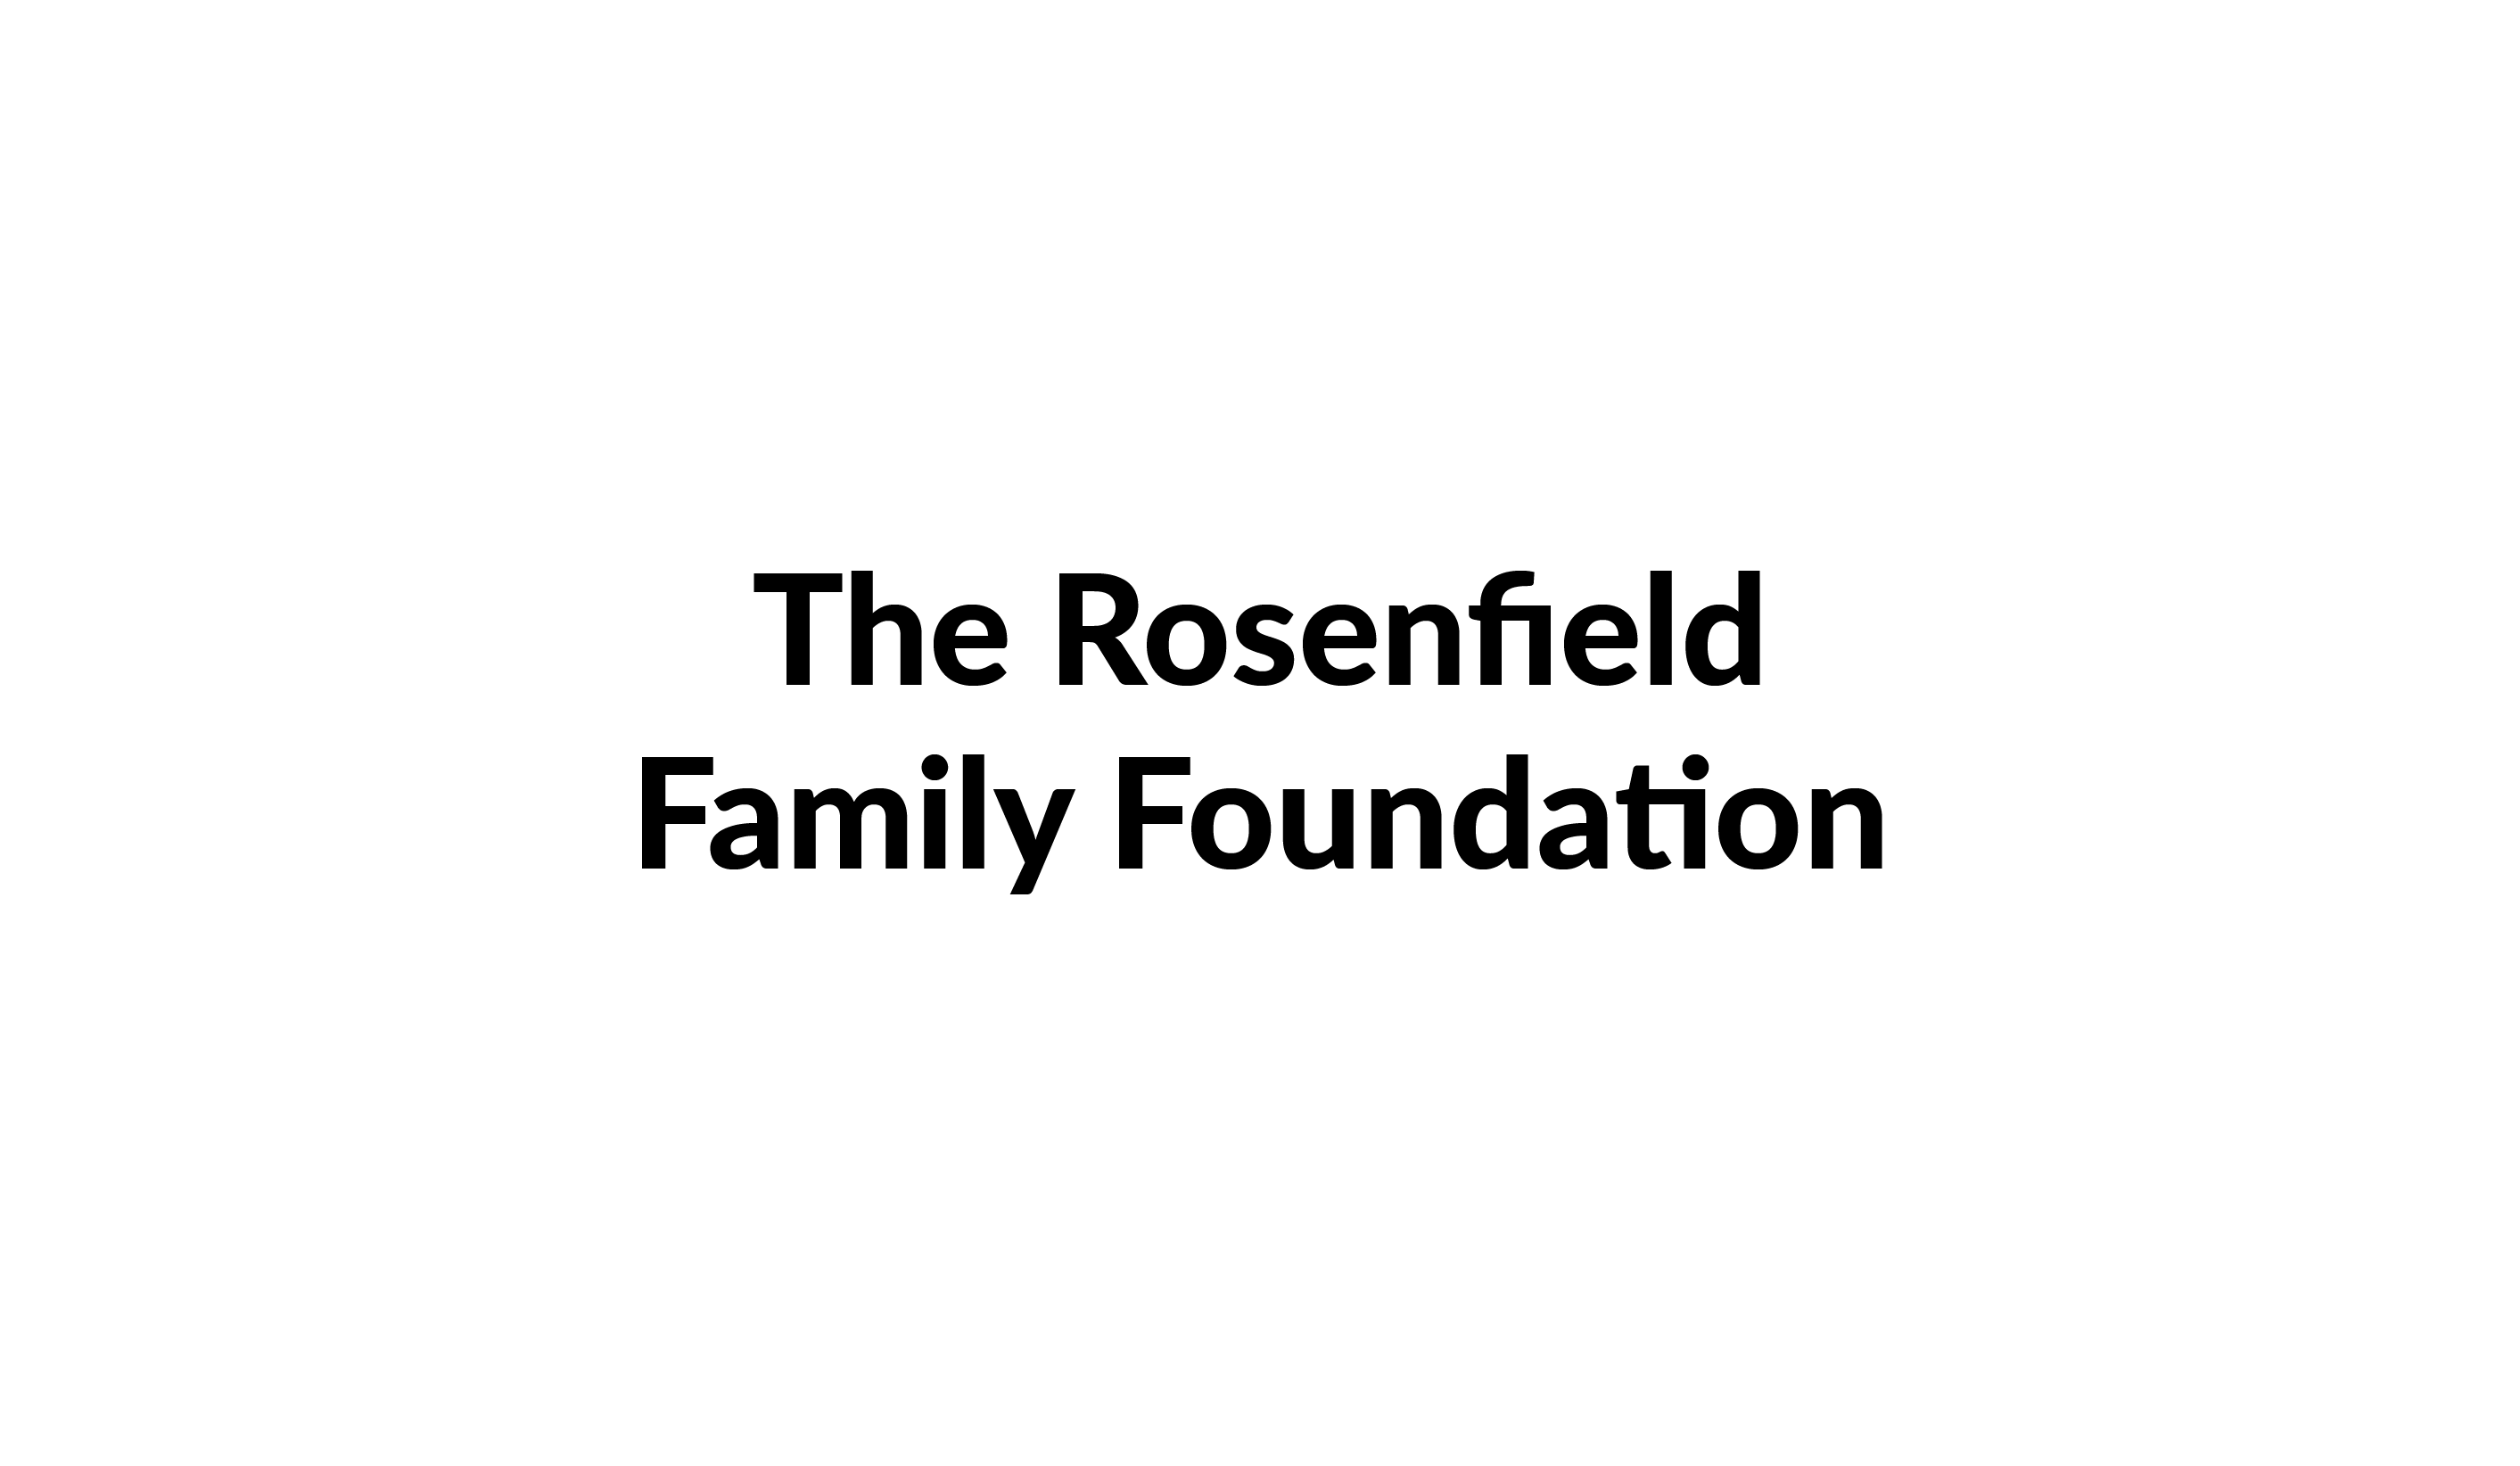 The Rosenfield Family Foundation